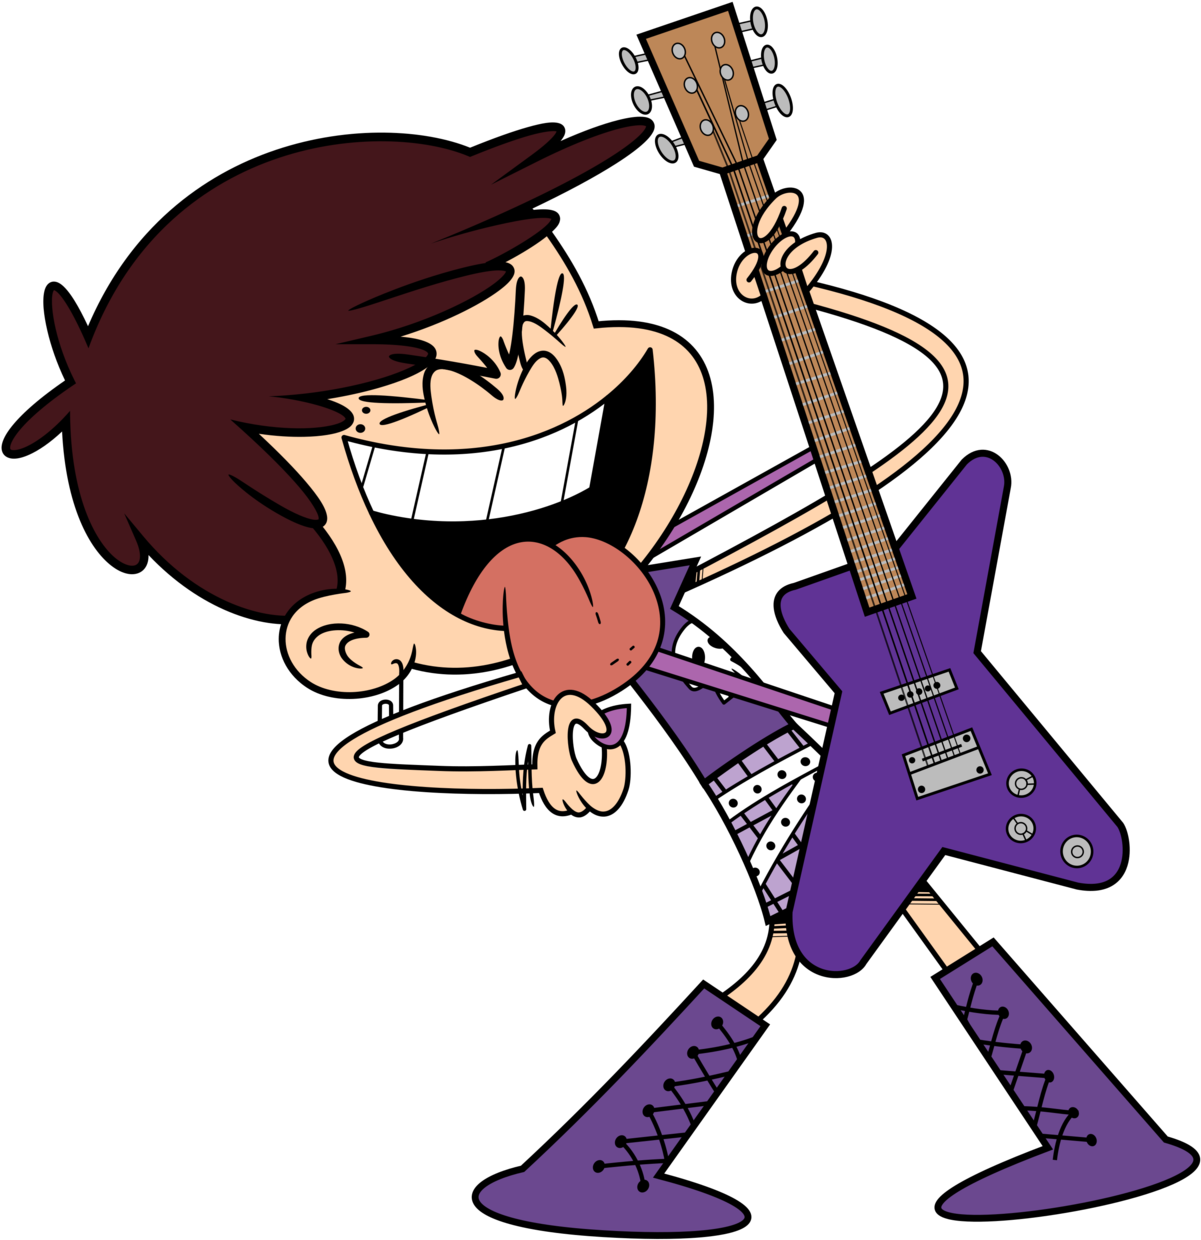 Download and share clipart about The Loud House Luna Loud Vector Guitar Lou...